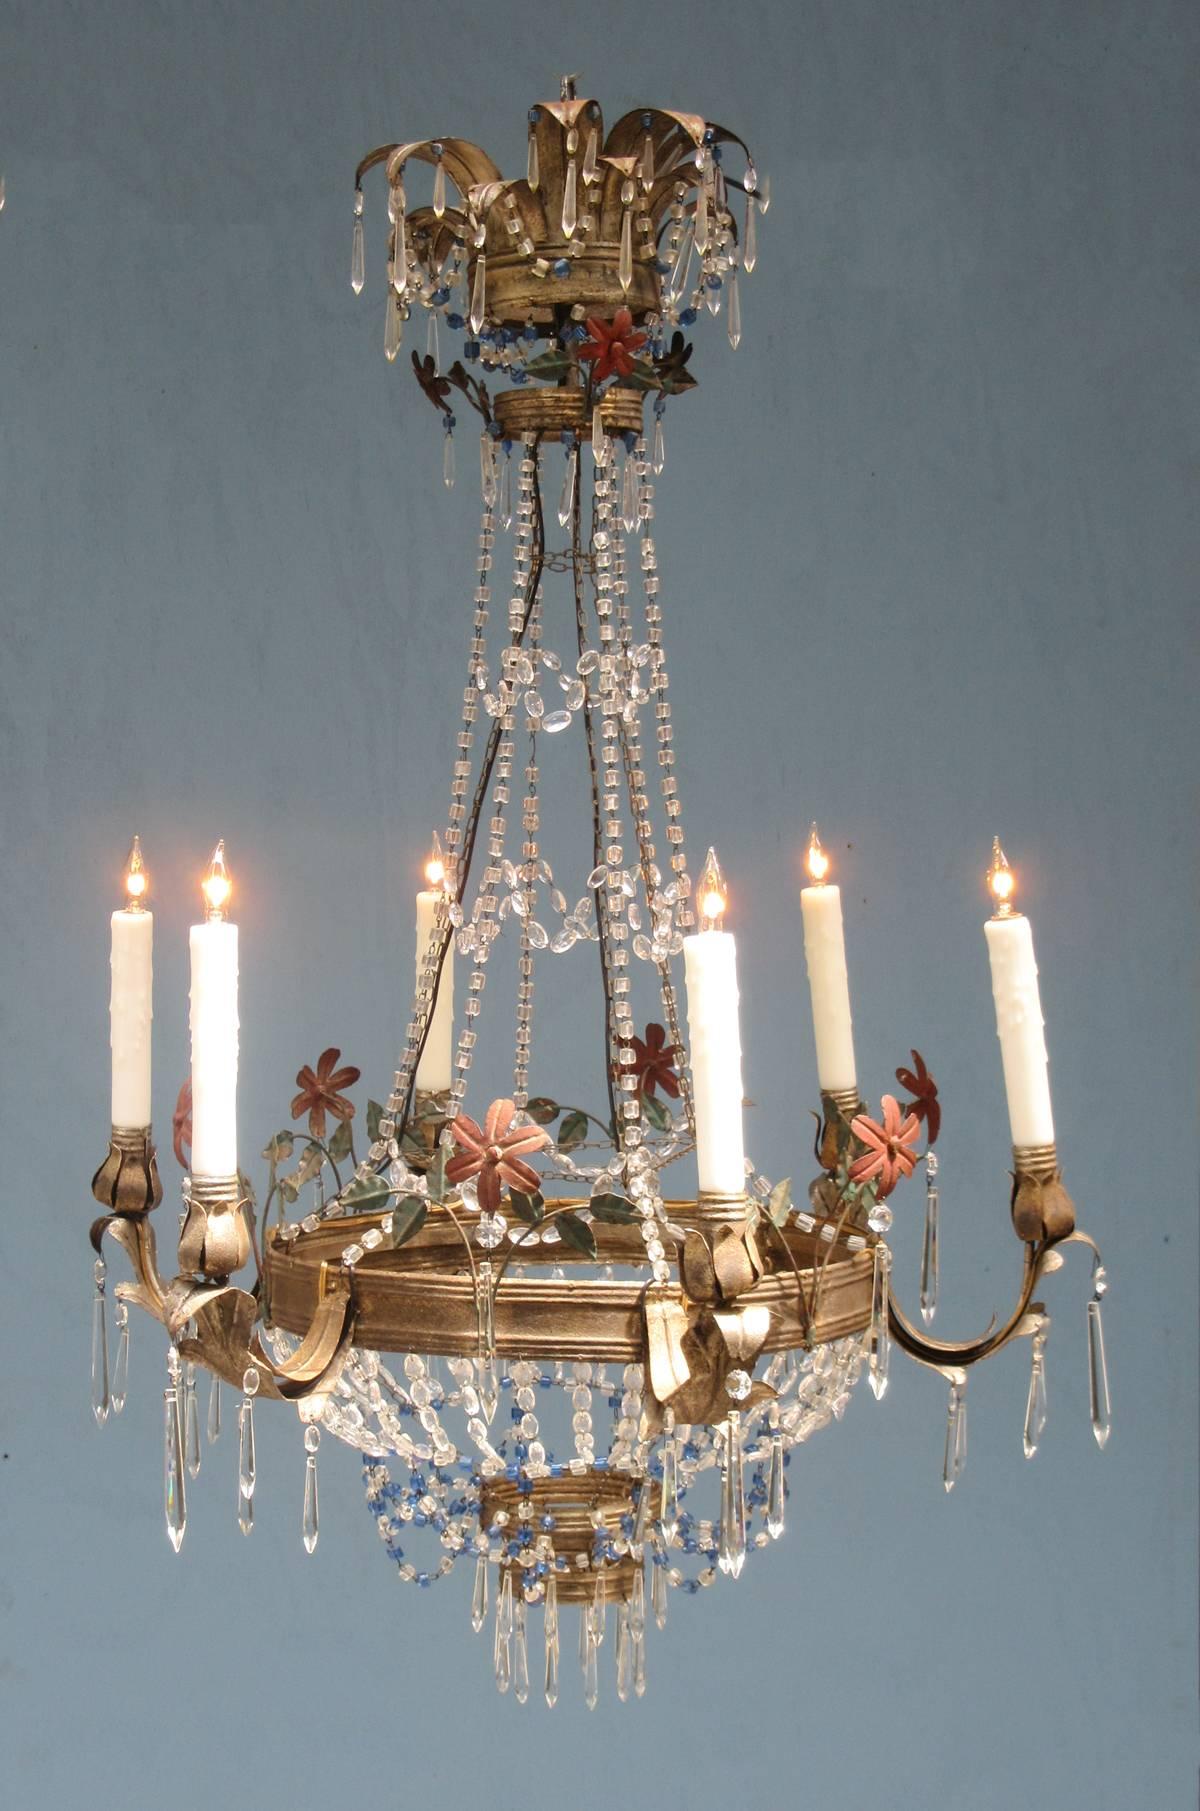 A mid-19th century Italian Empire tole and crystal chandelier, circa 1860, featuring six candle arms, painted tole floral appliques and draped with blue and white beaded crystals. The chandelier was originally candle but has recently been rewired